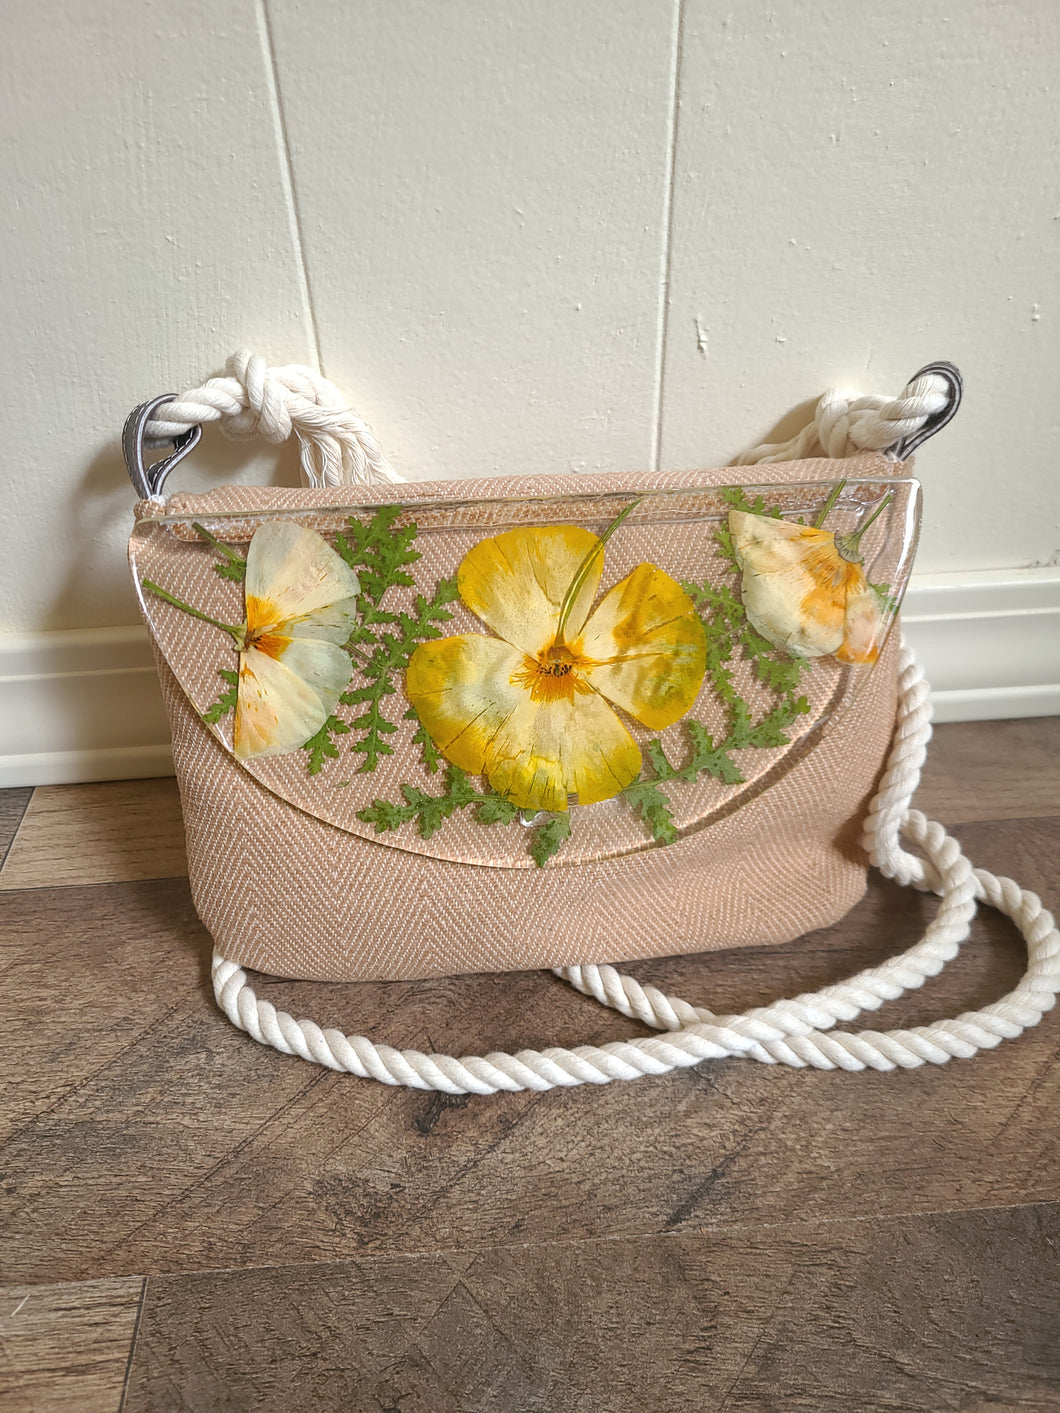 California Poppies crossbody bag, 8.25 inches x 6.25 inches daily bag, adjustable/removable straps, magnetic closure, pressed flower in resin, lightweight daily bag